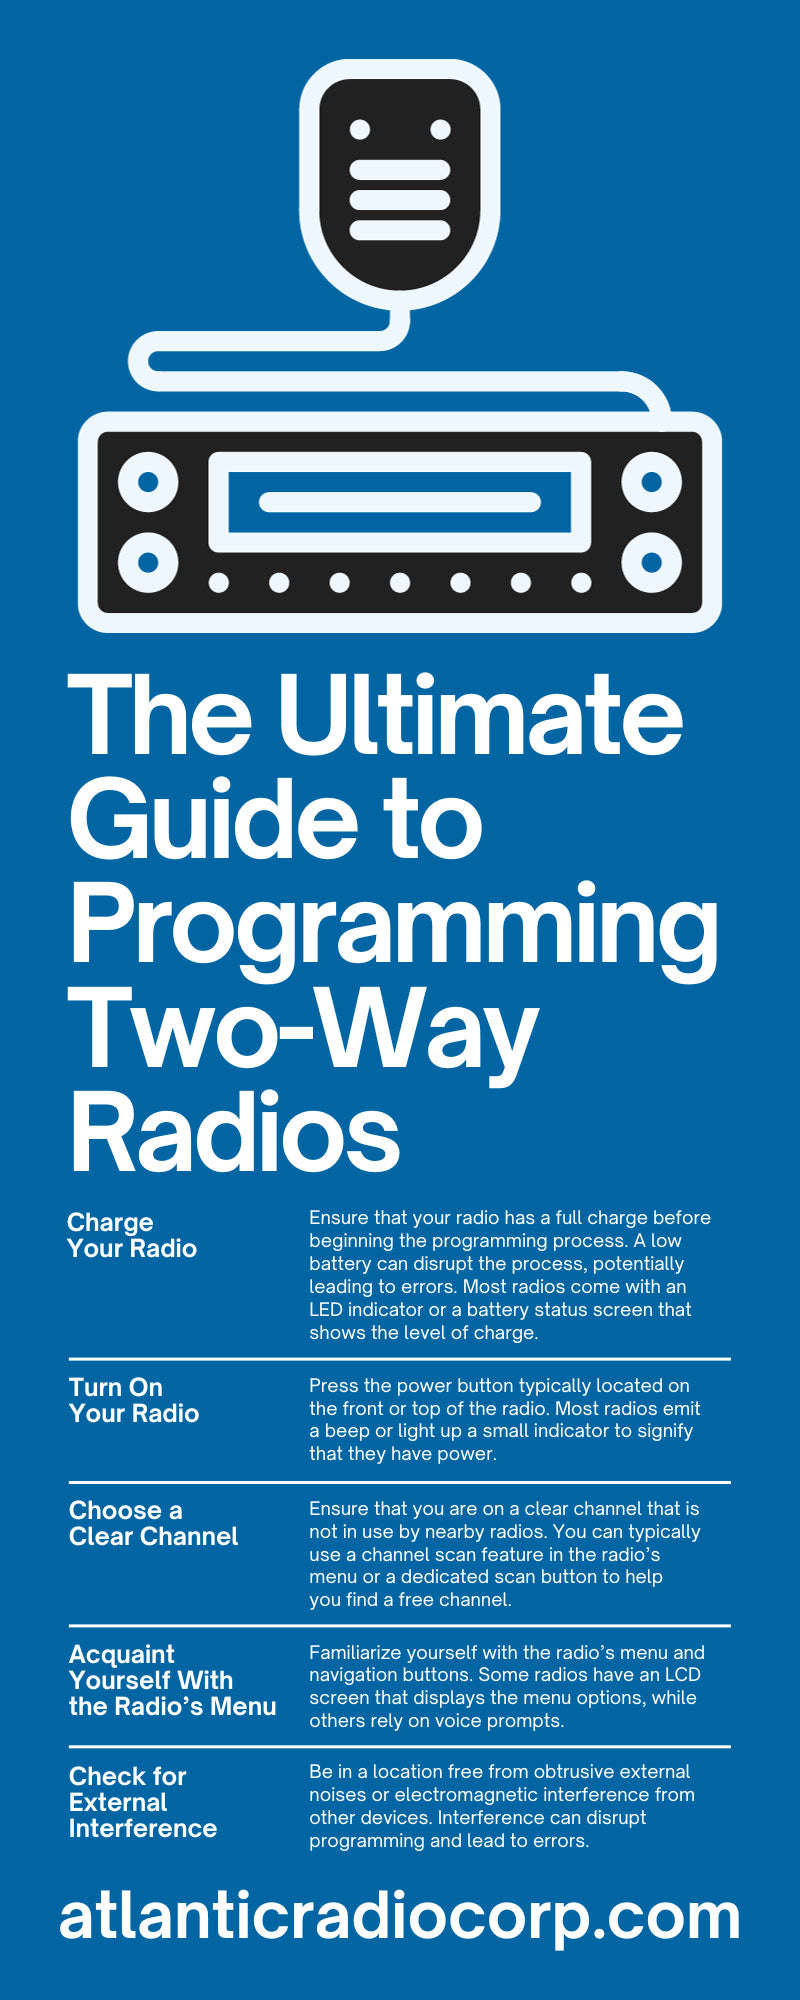 The Ultimate Guide to Programming Two-Way Radios